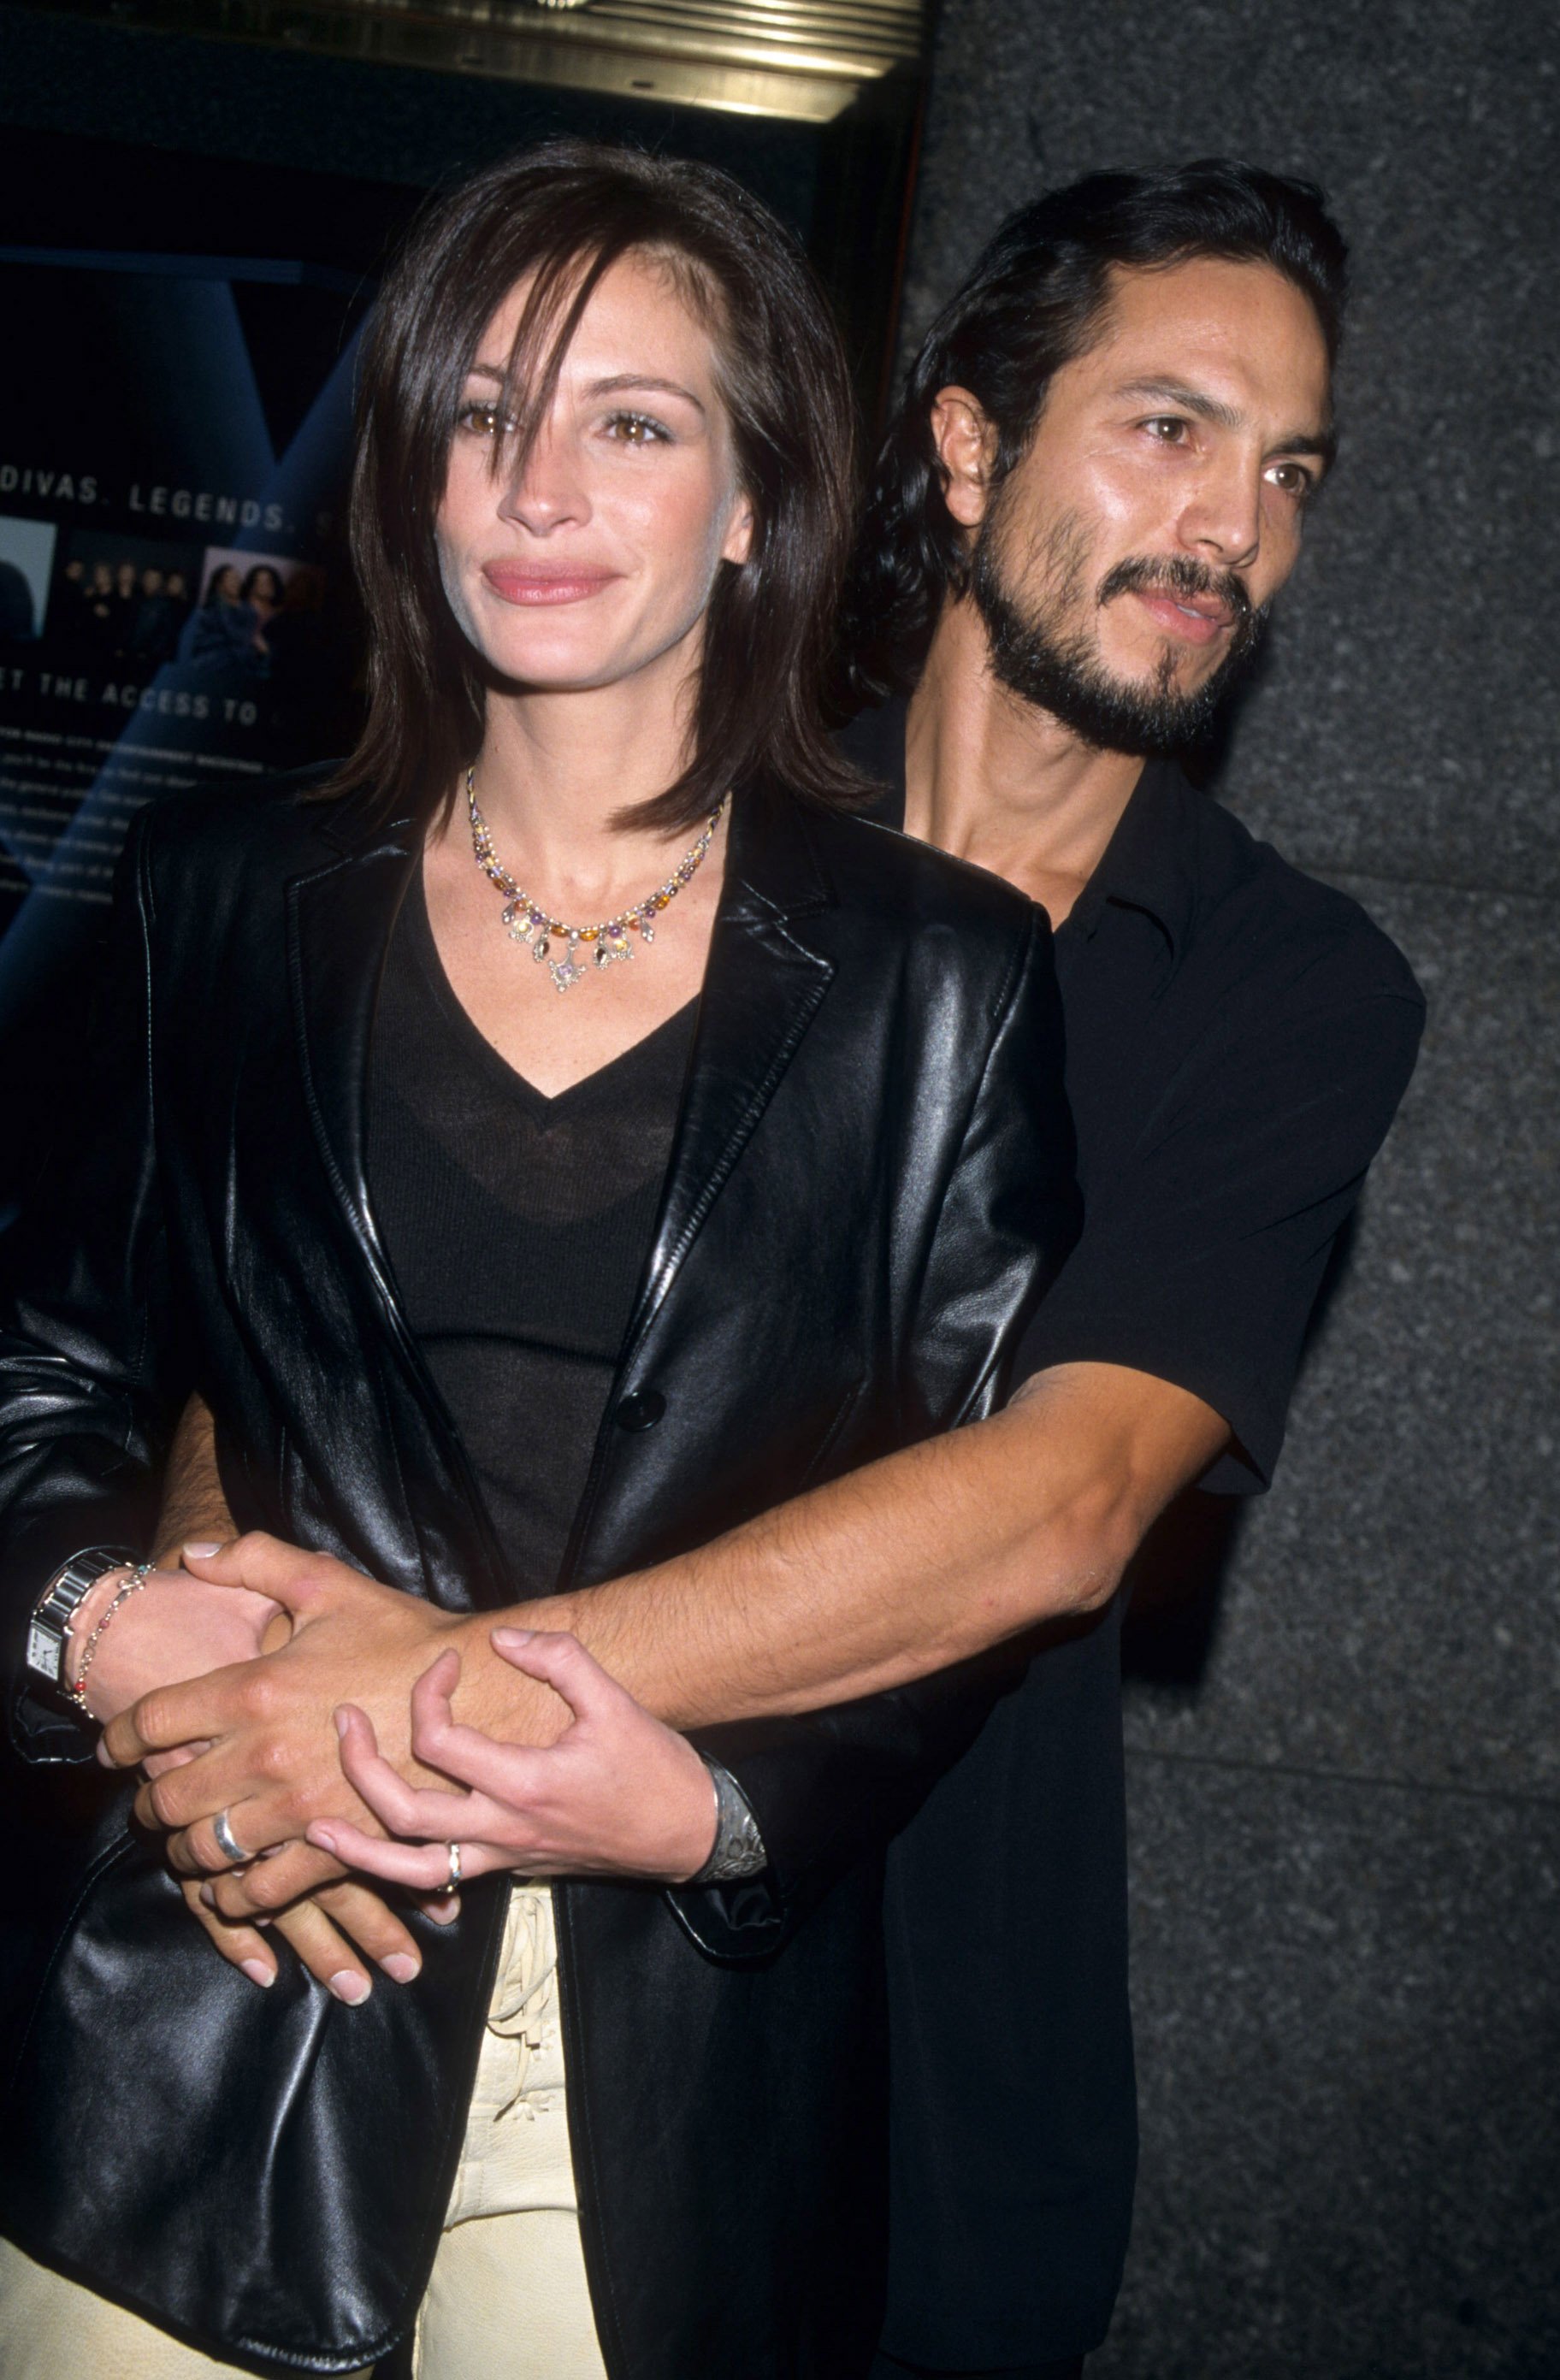 Julia Roberts and Benjamin Bratt during DNC 2000 Fundraiser NY Concert on September 14, 2000at Radio City Music Hall in New York City, New York | Source: Getty Images